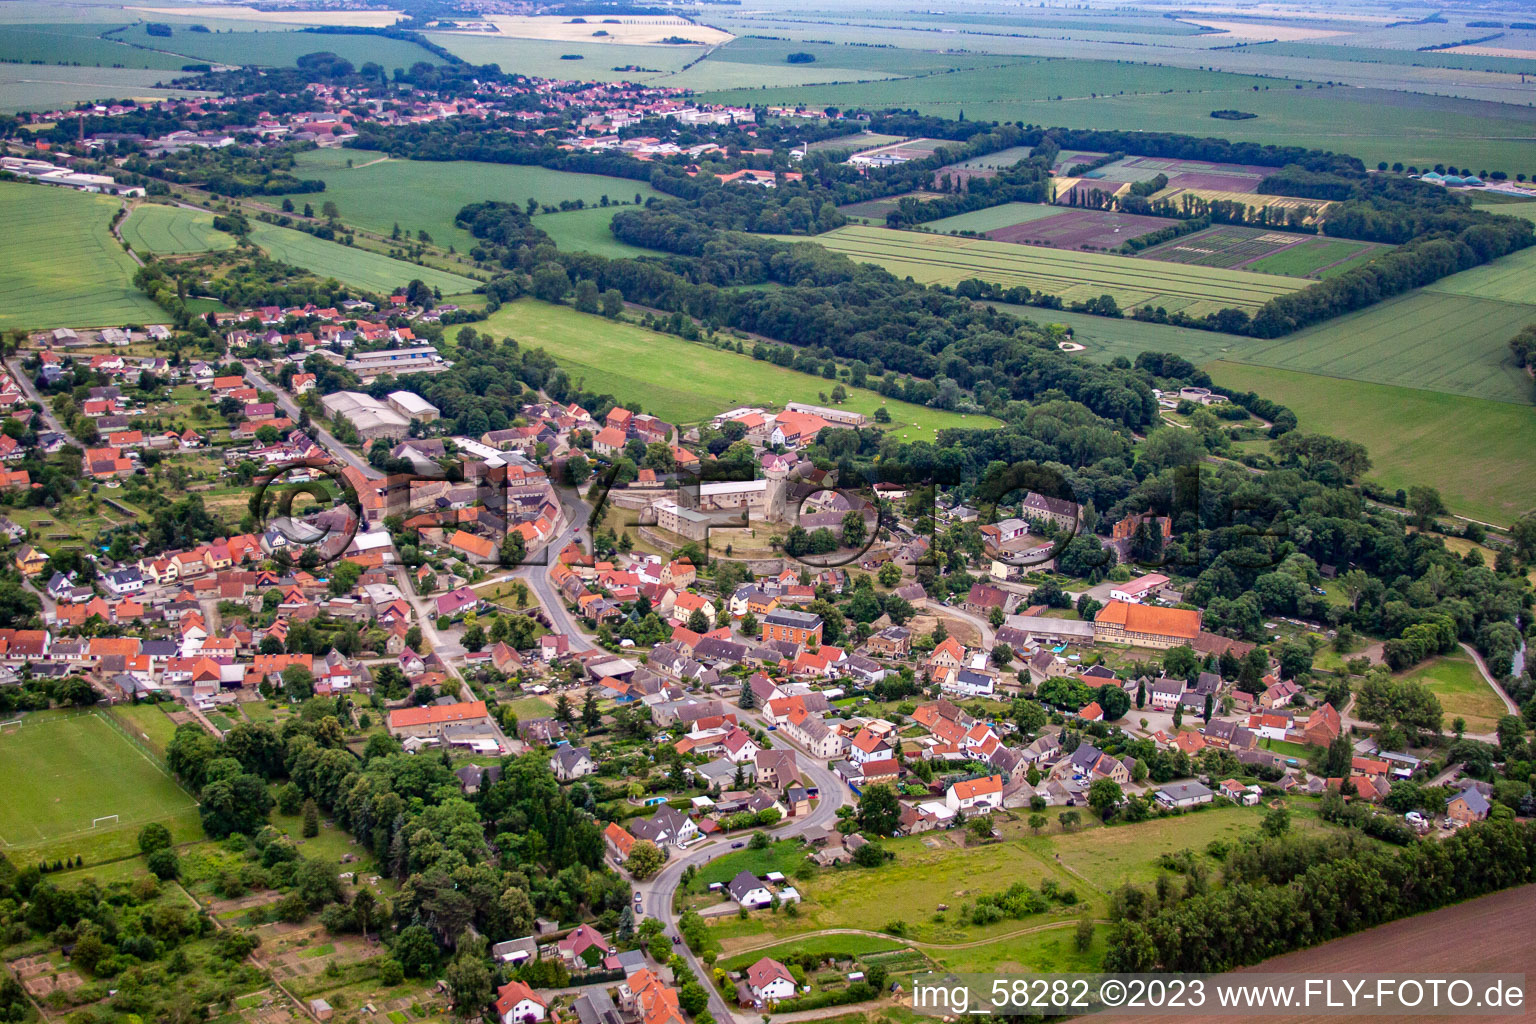 From northwest in the district Hausneindorf in Selke-Aue in the state Saxony-Anhalt, Germany